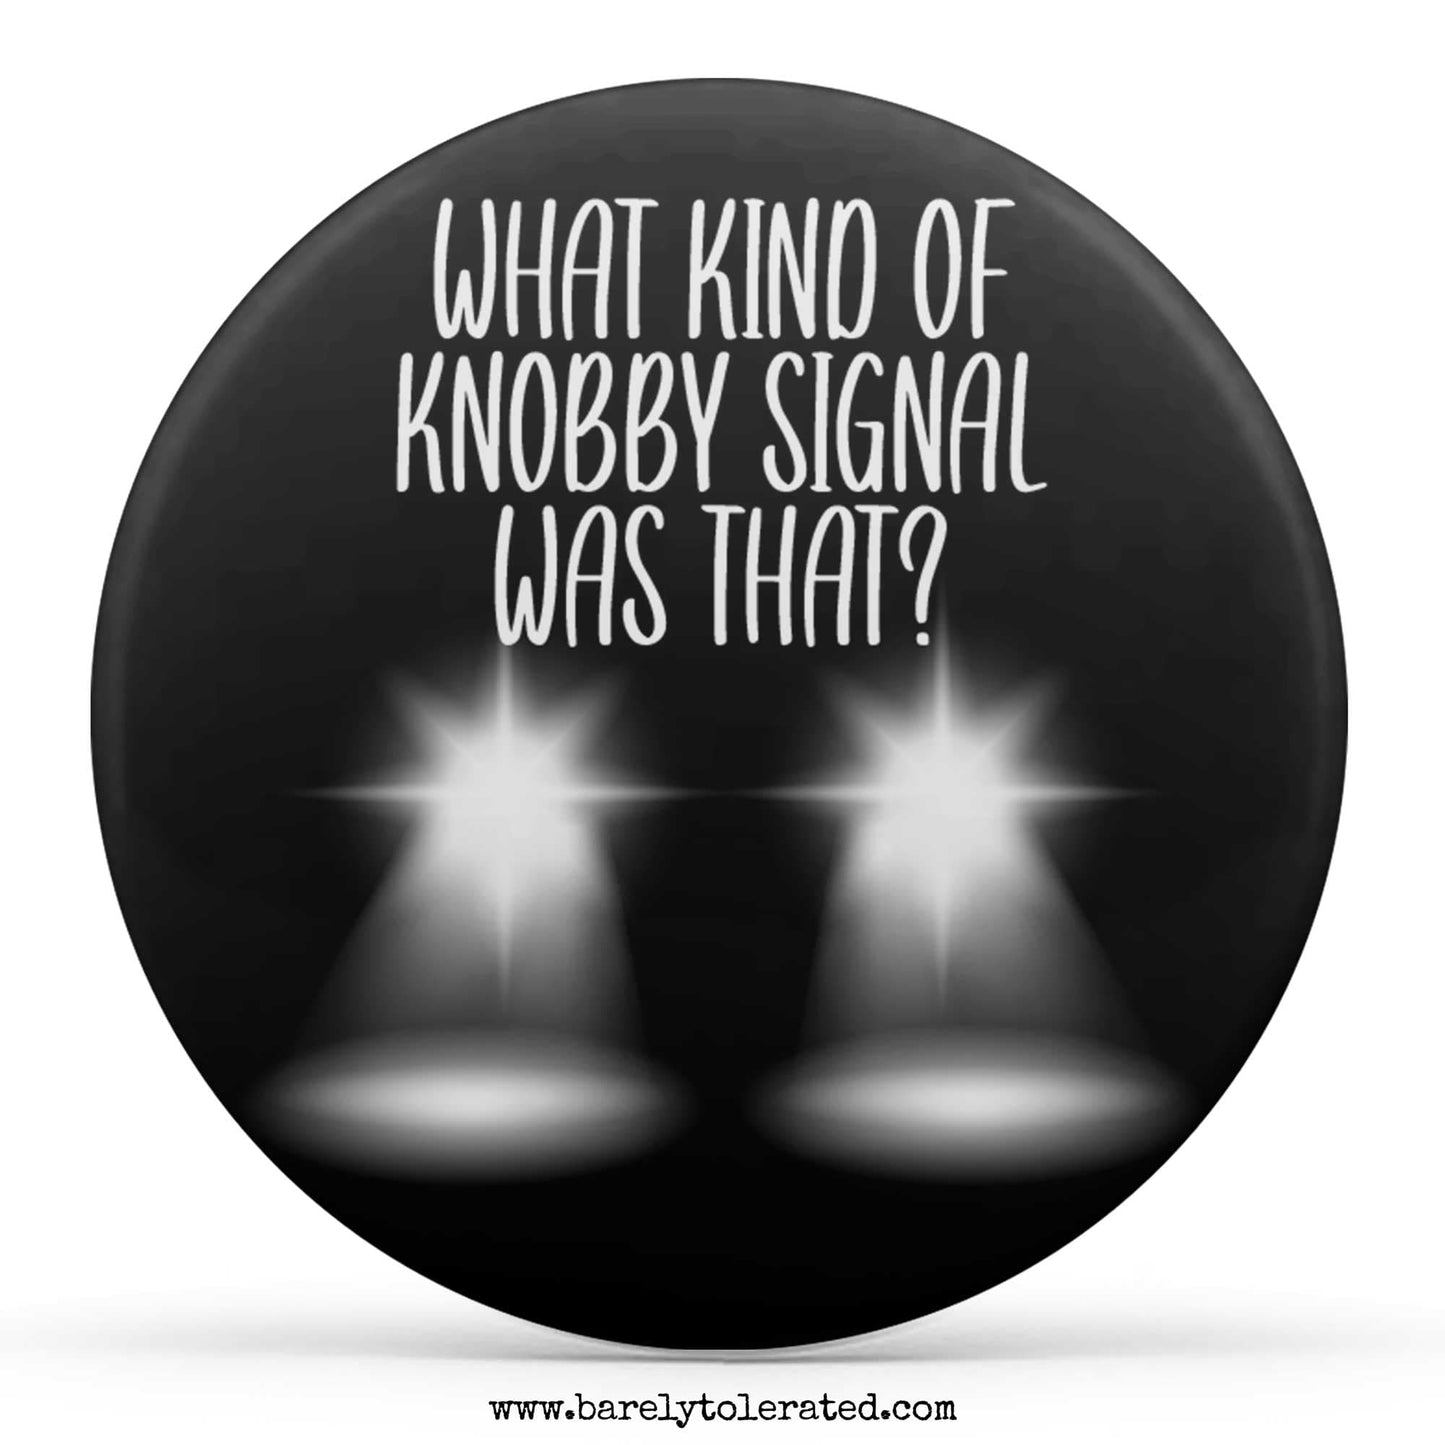 What Kind of Knobby Signal Was That?